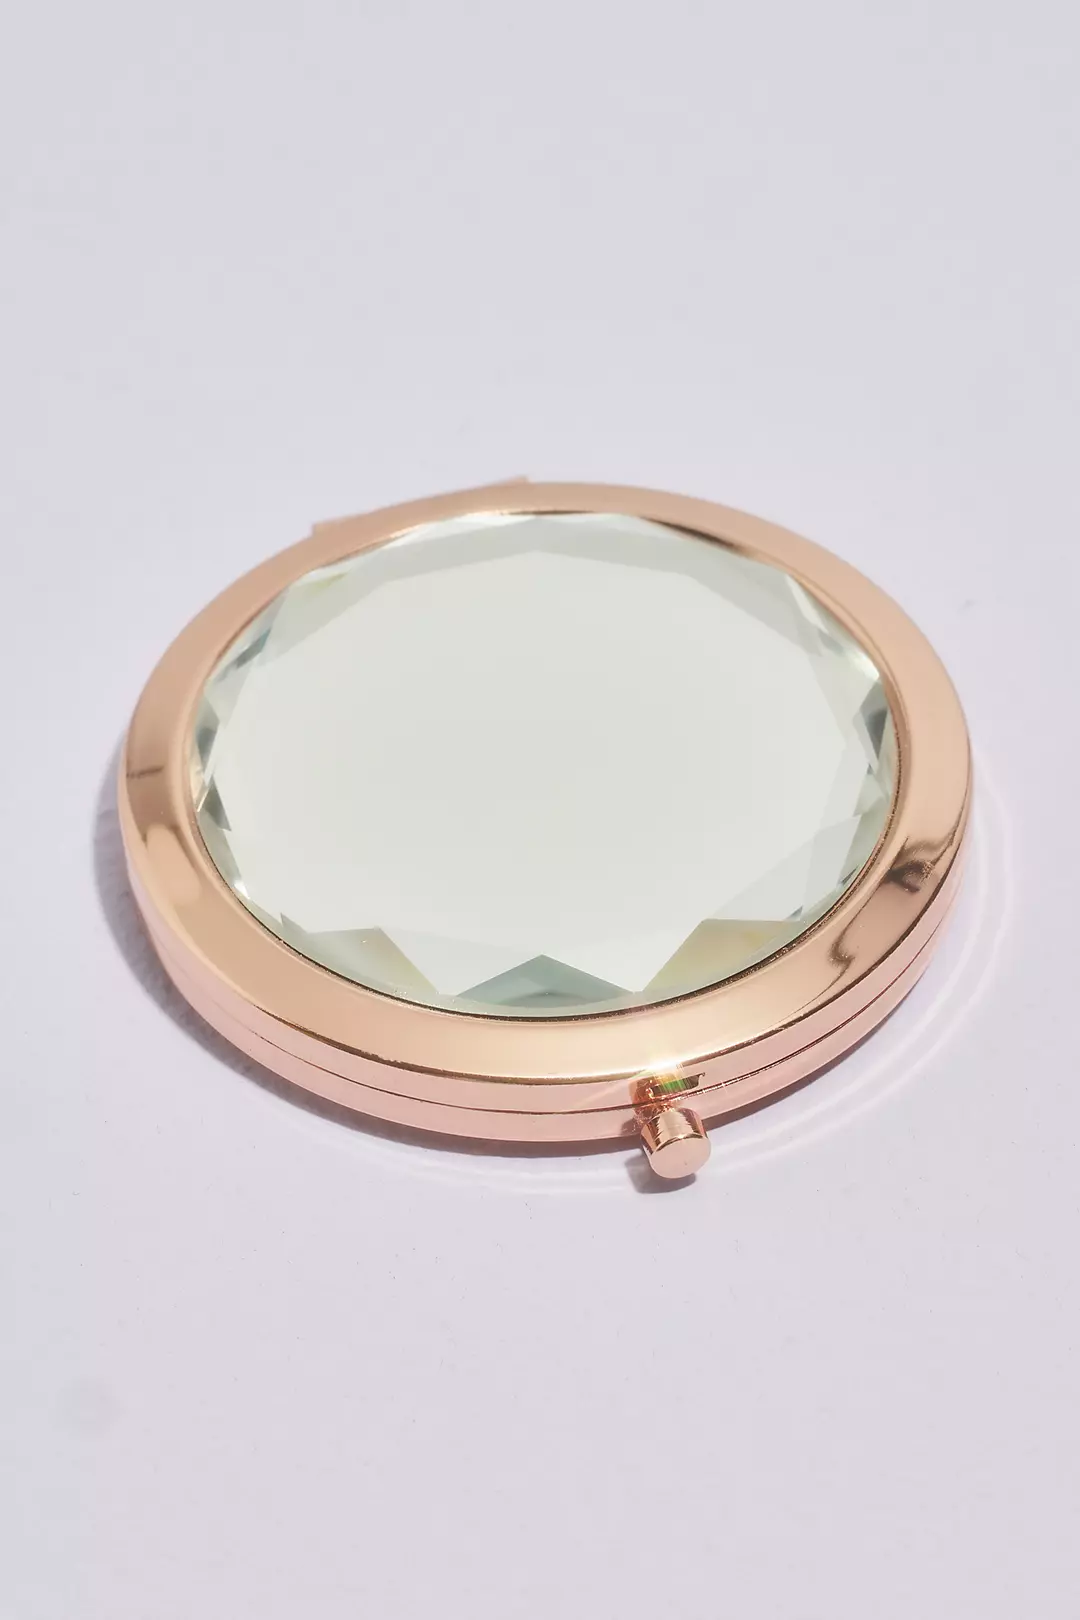 wadbeev Set of 5-10 Rose Gold Compact Mirrors with Your Name